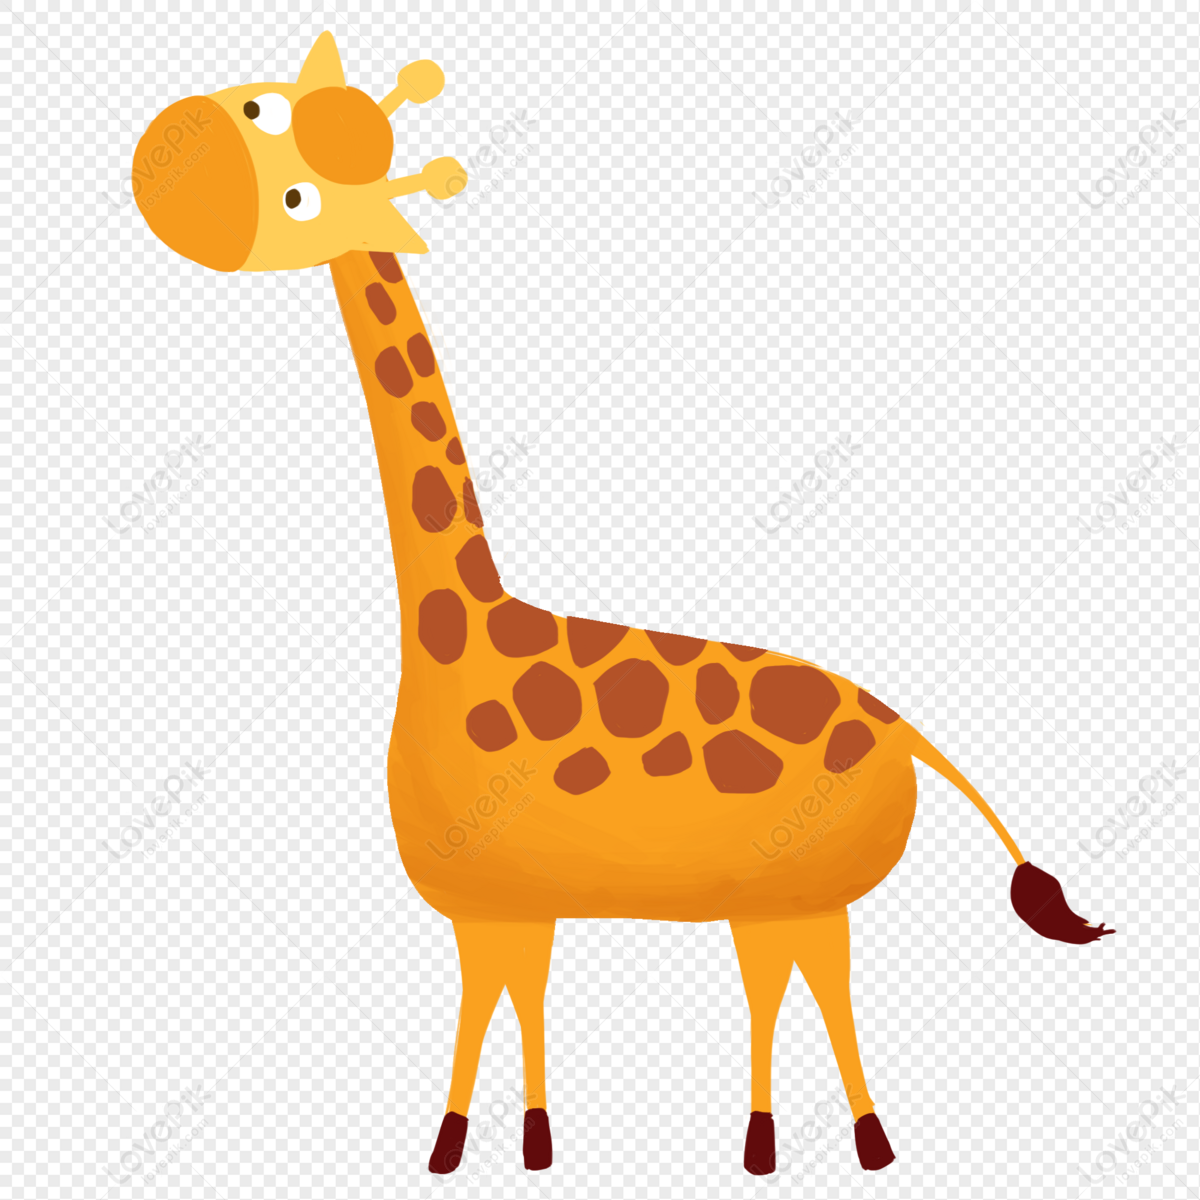 Premium Photo | Japanese cute giraffe repeated patterns anime art style  with pastel colors